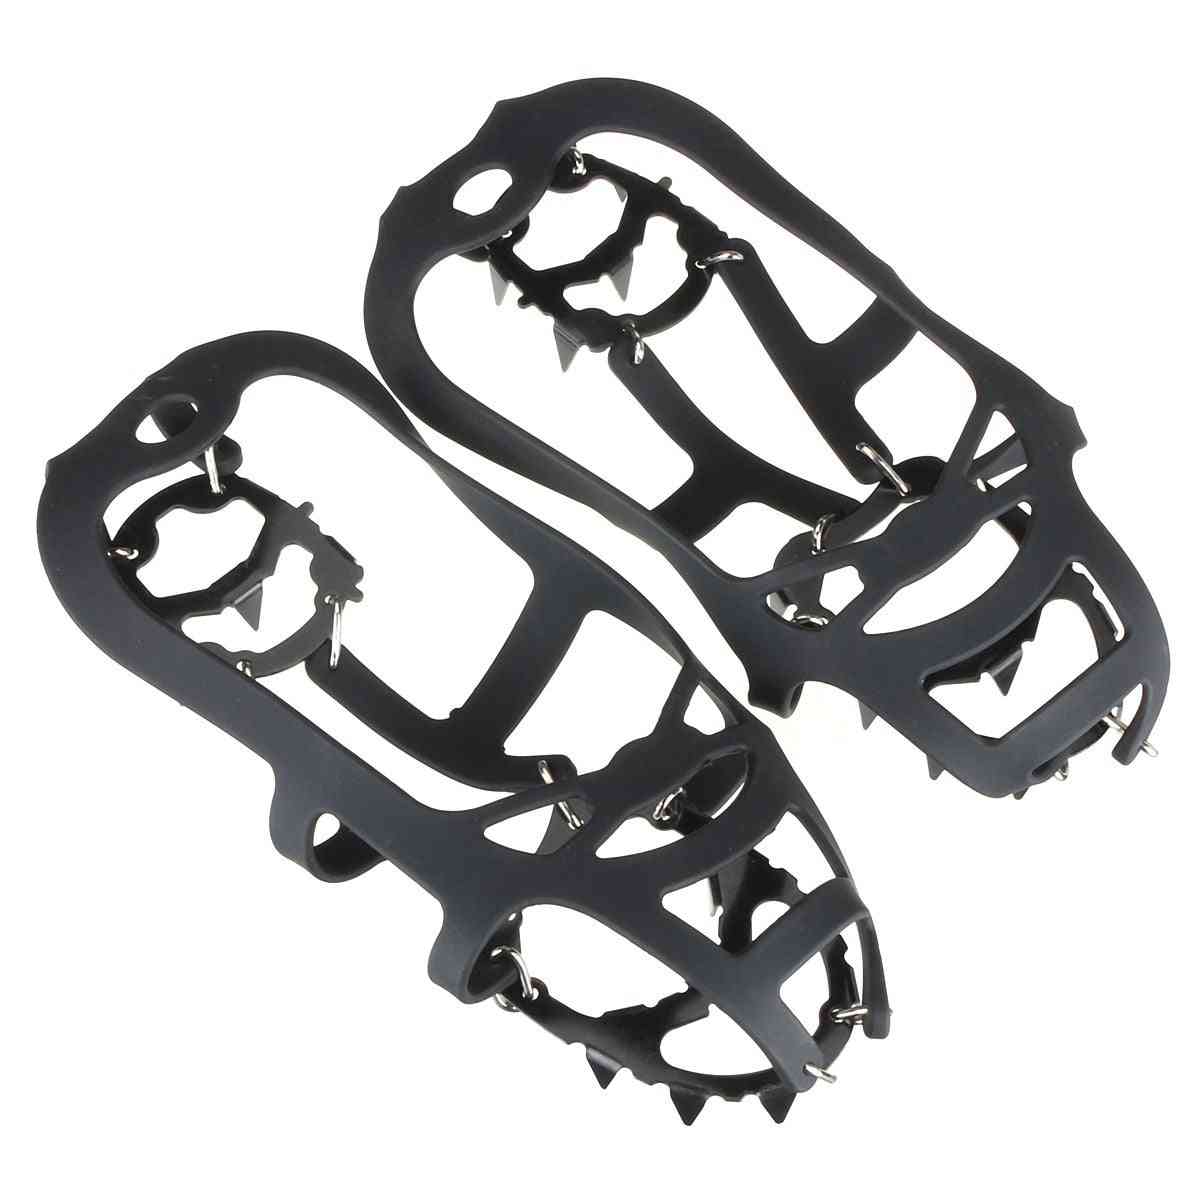 Non-slip Crampons, Ice Spike Grips Cleats For Shoe